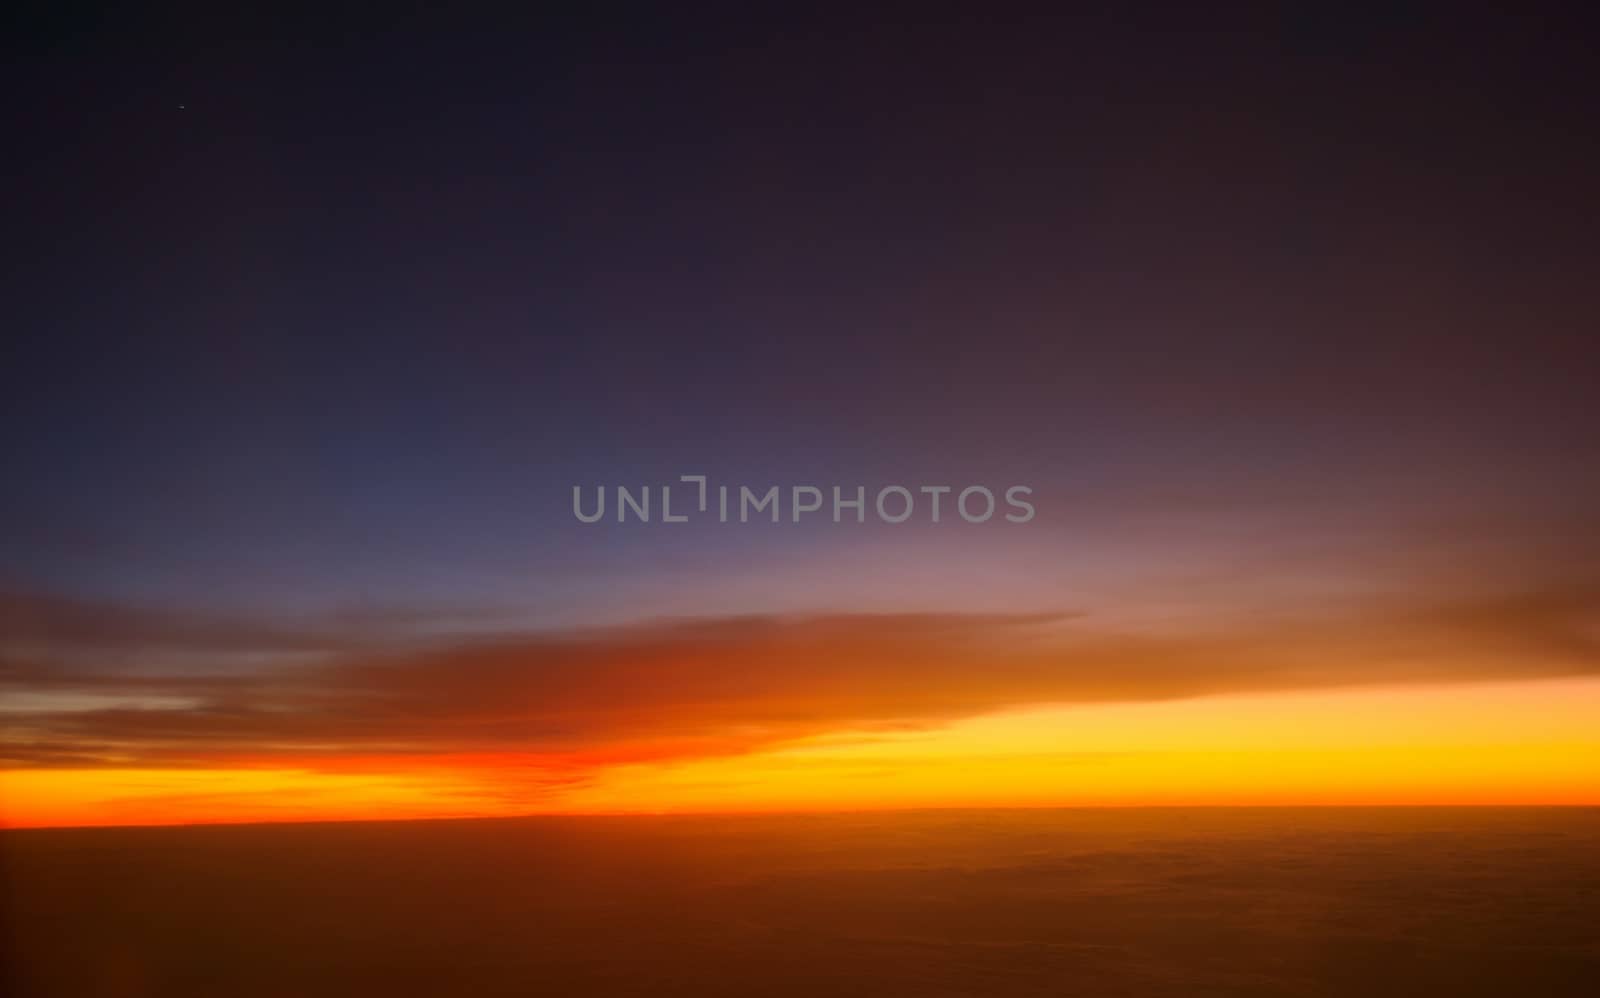 Twilight sky at high altitude, just before dawn. by hernan_hyper